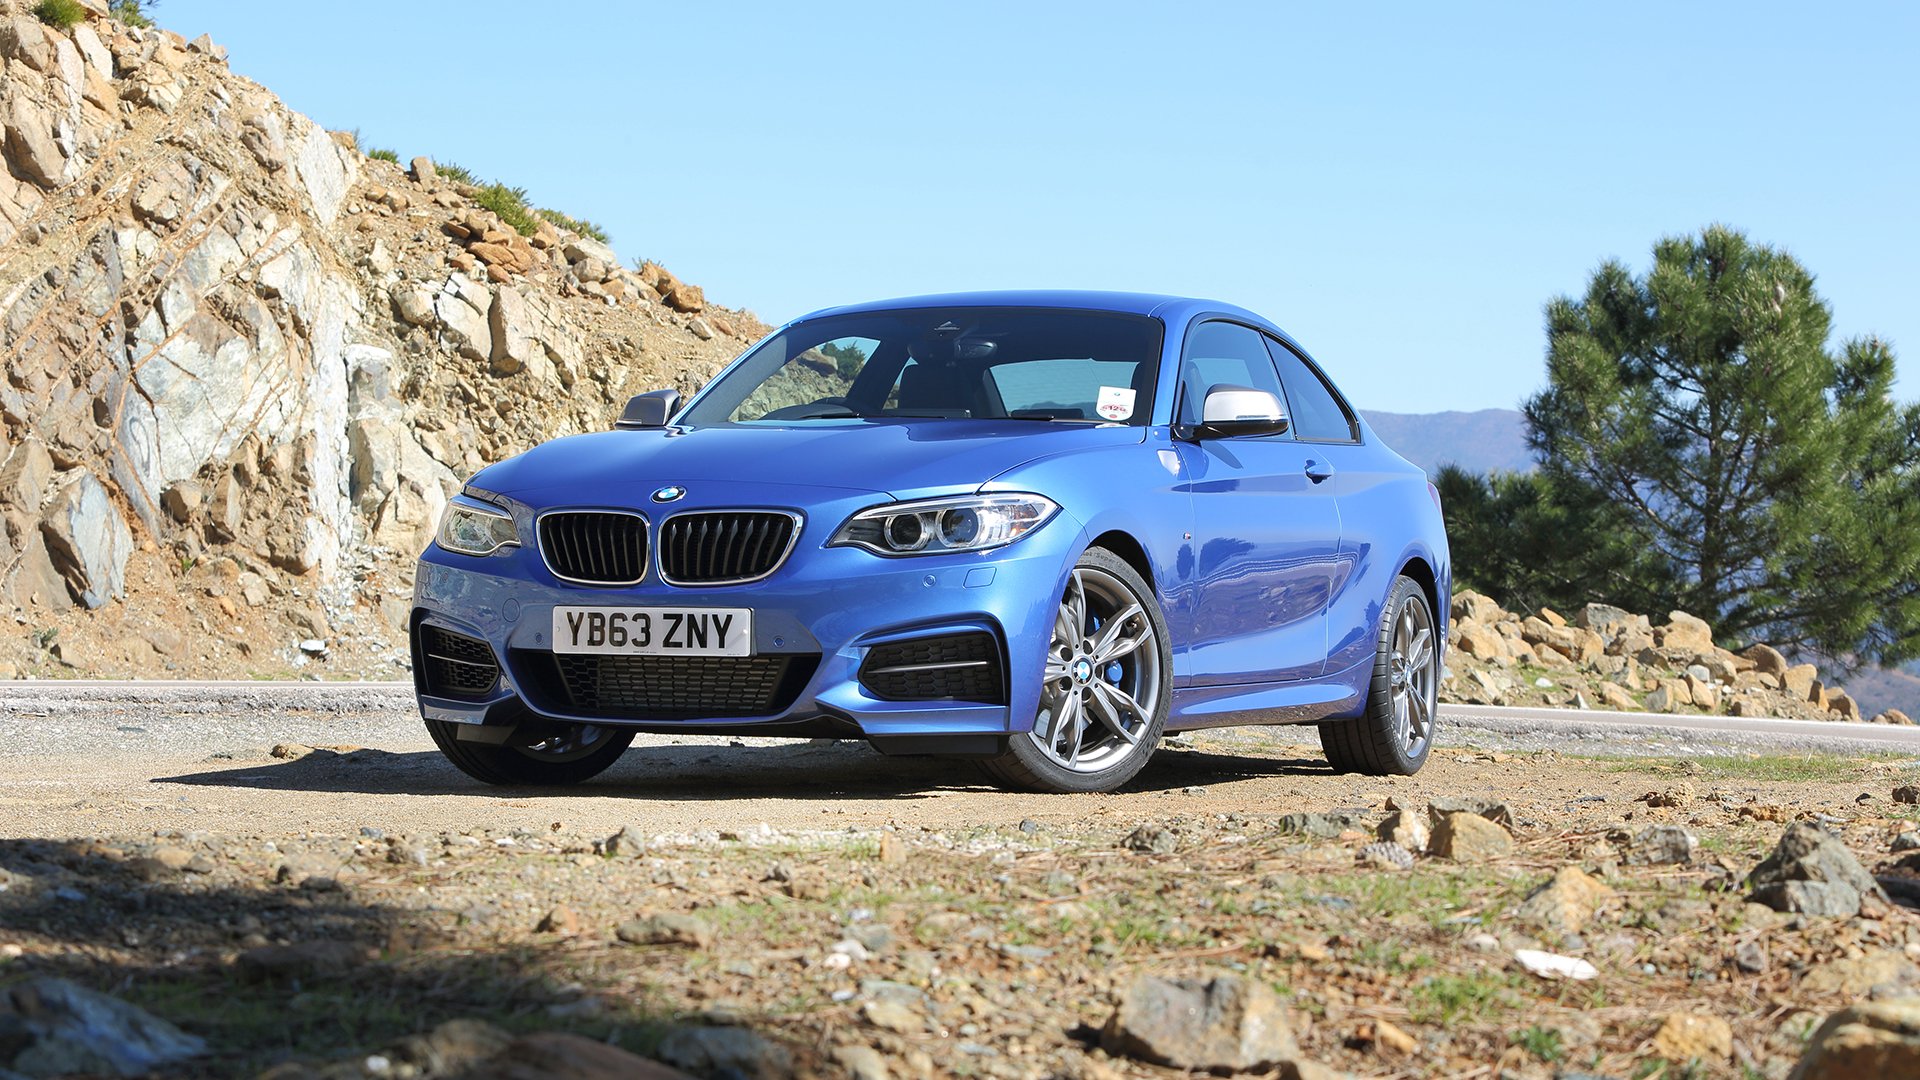 BMW 2 Series Coupe (2017 - ) review | Auto Trader UK